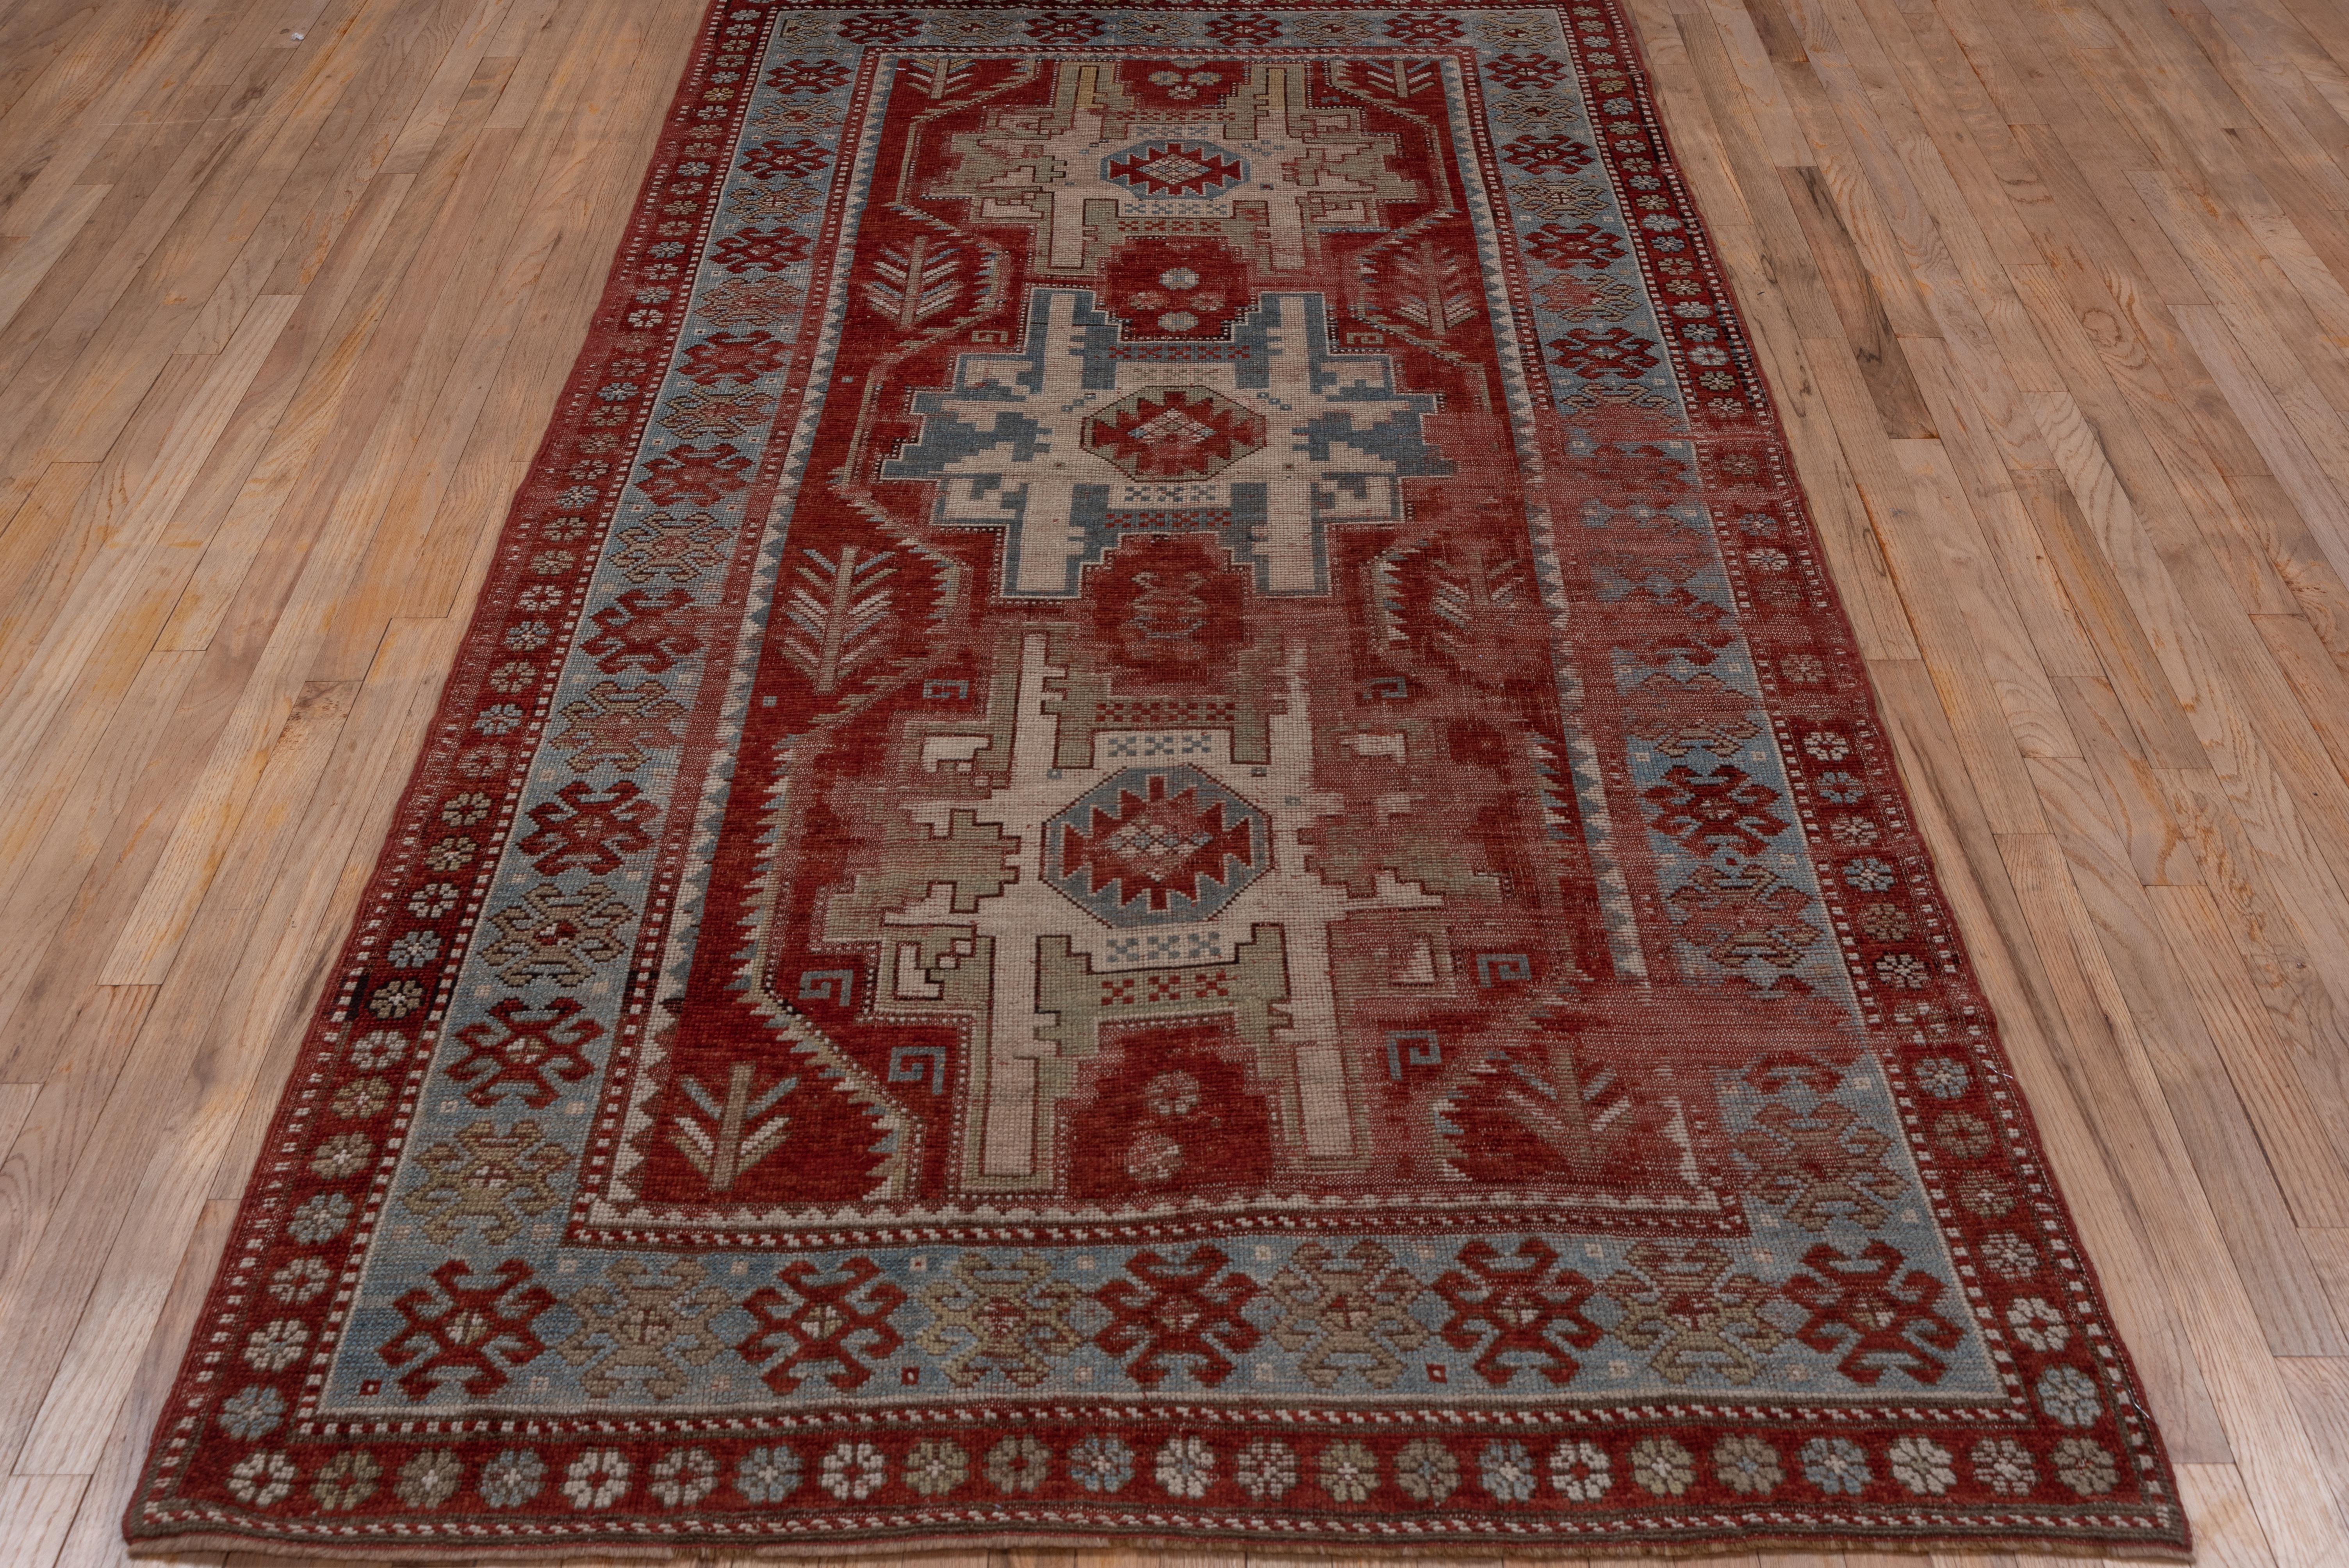 The madder red field displays three enormous Lesghi Stars with cream sub-stars and red ashik centres. The sky blue border of this South West Caucasian geometric rug show red and green hooked motive.